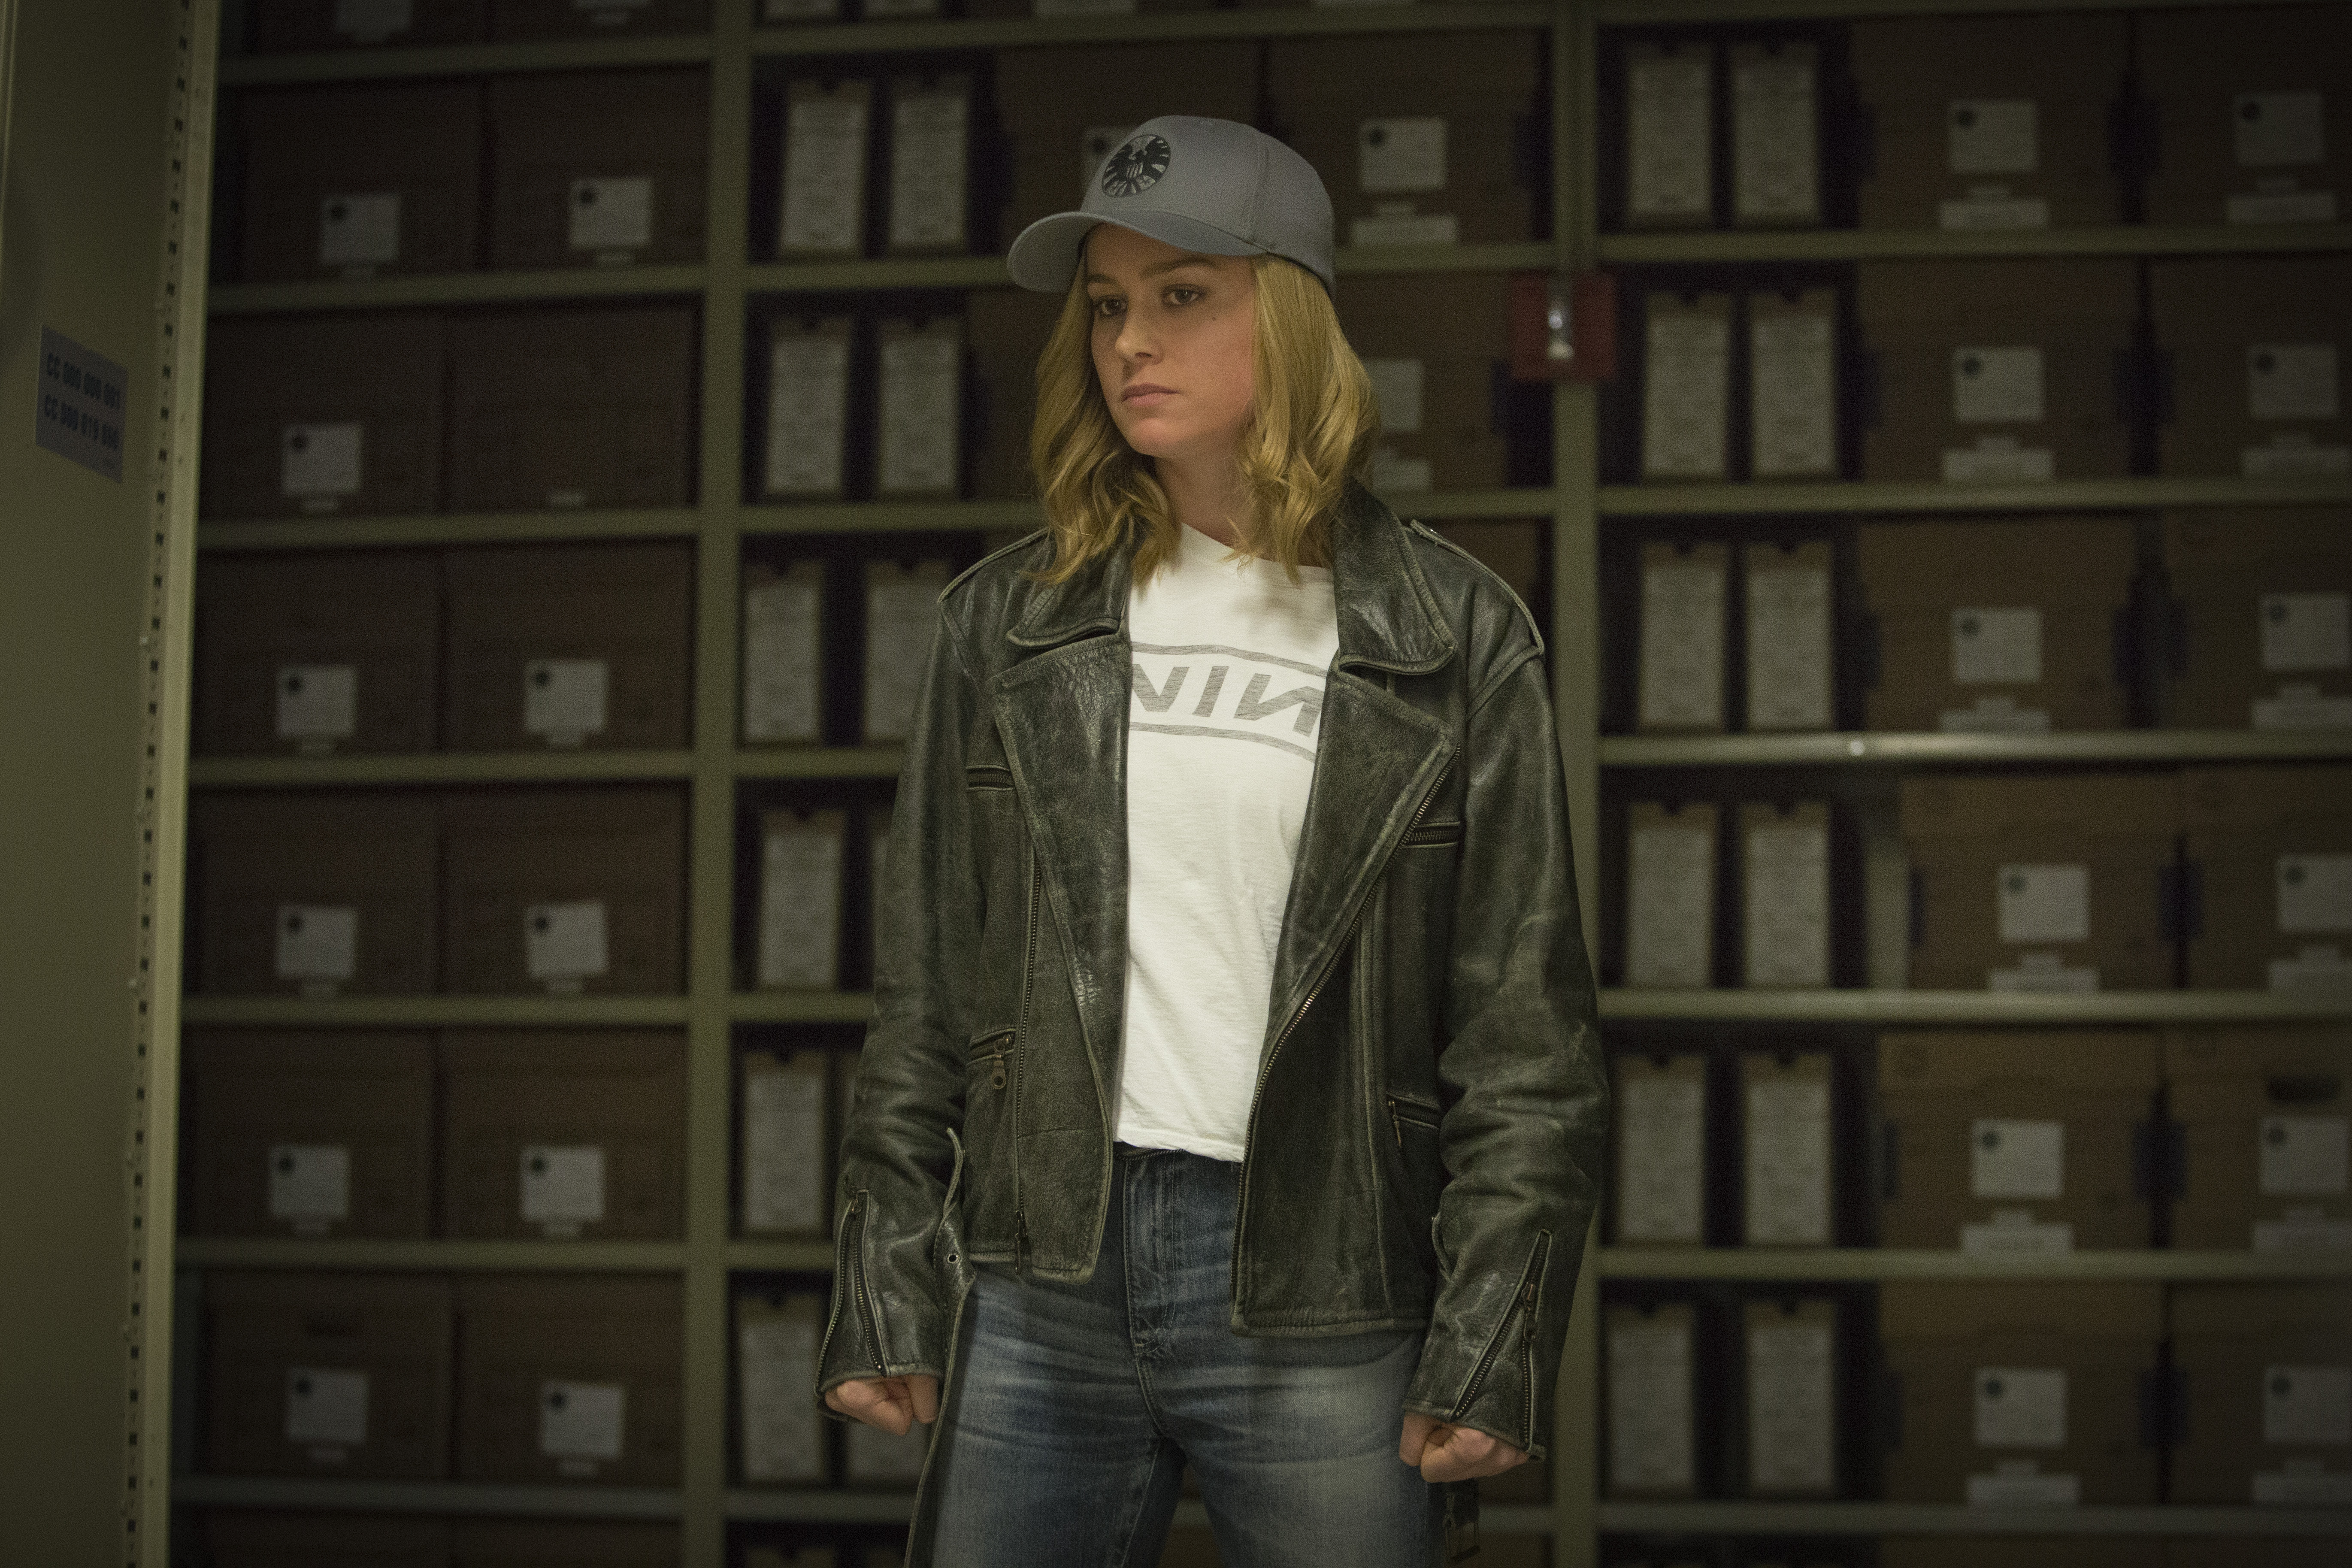 Captain Marvel 2018 Movie First Look Wallpapers